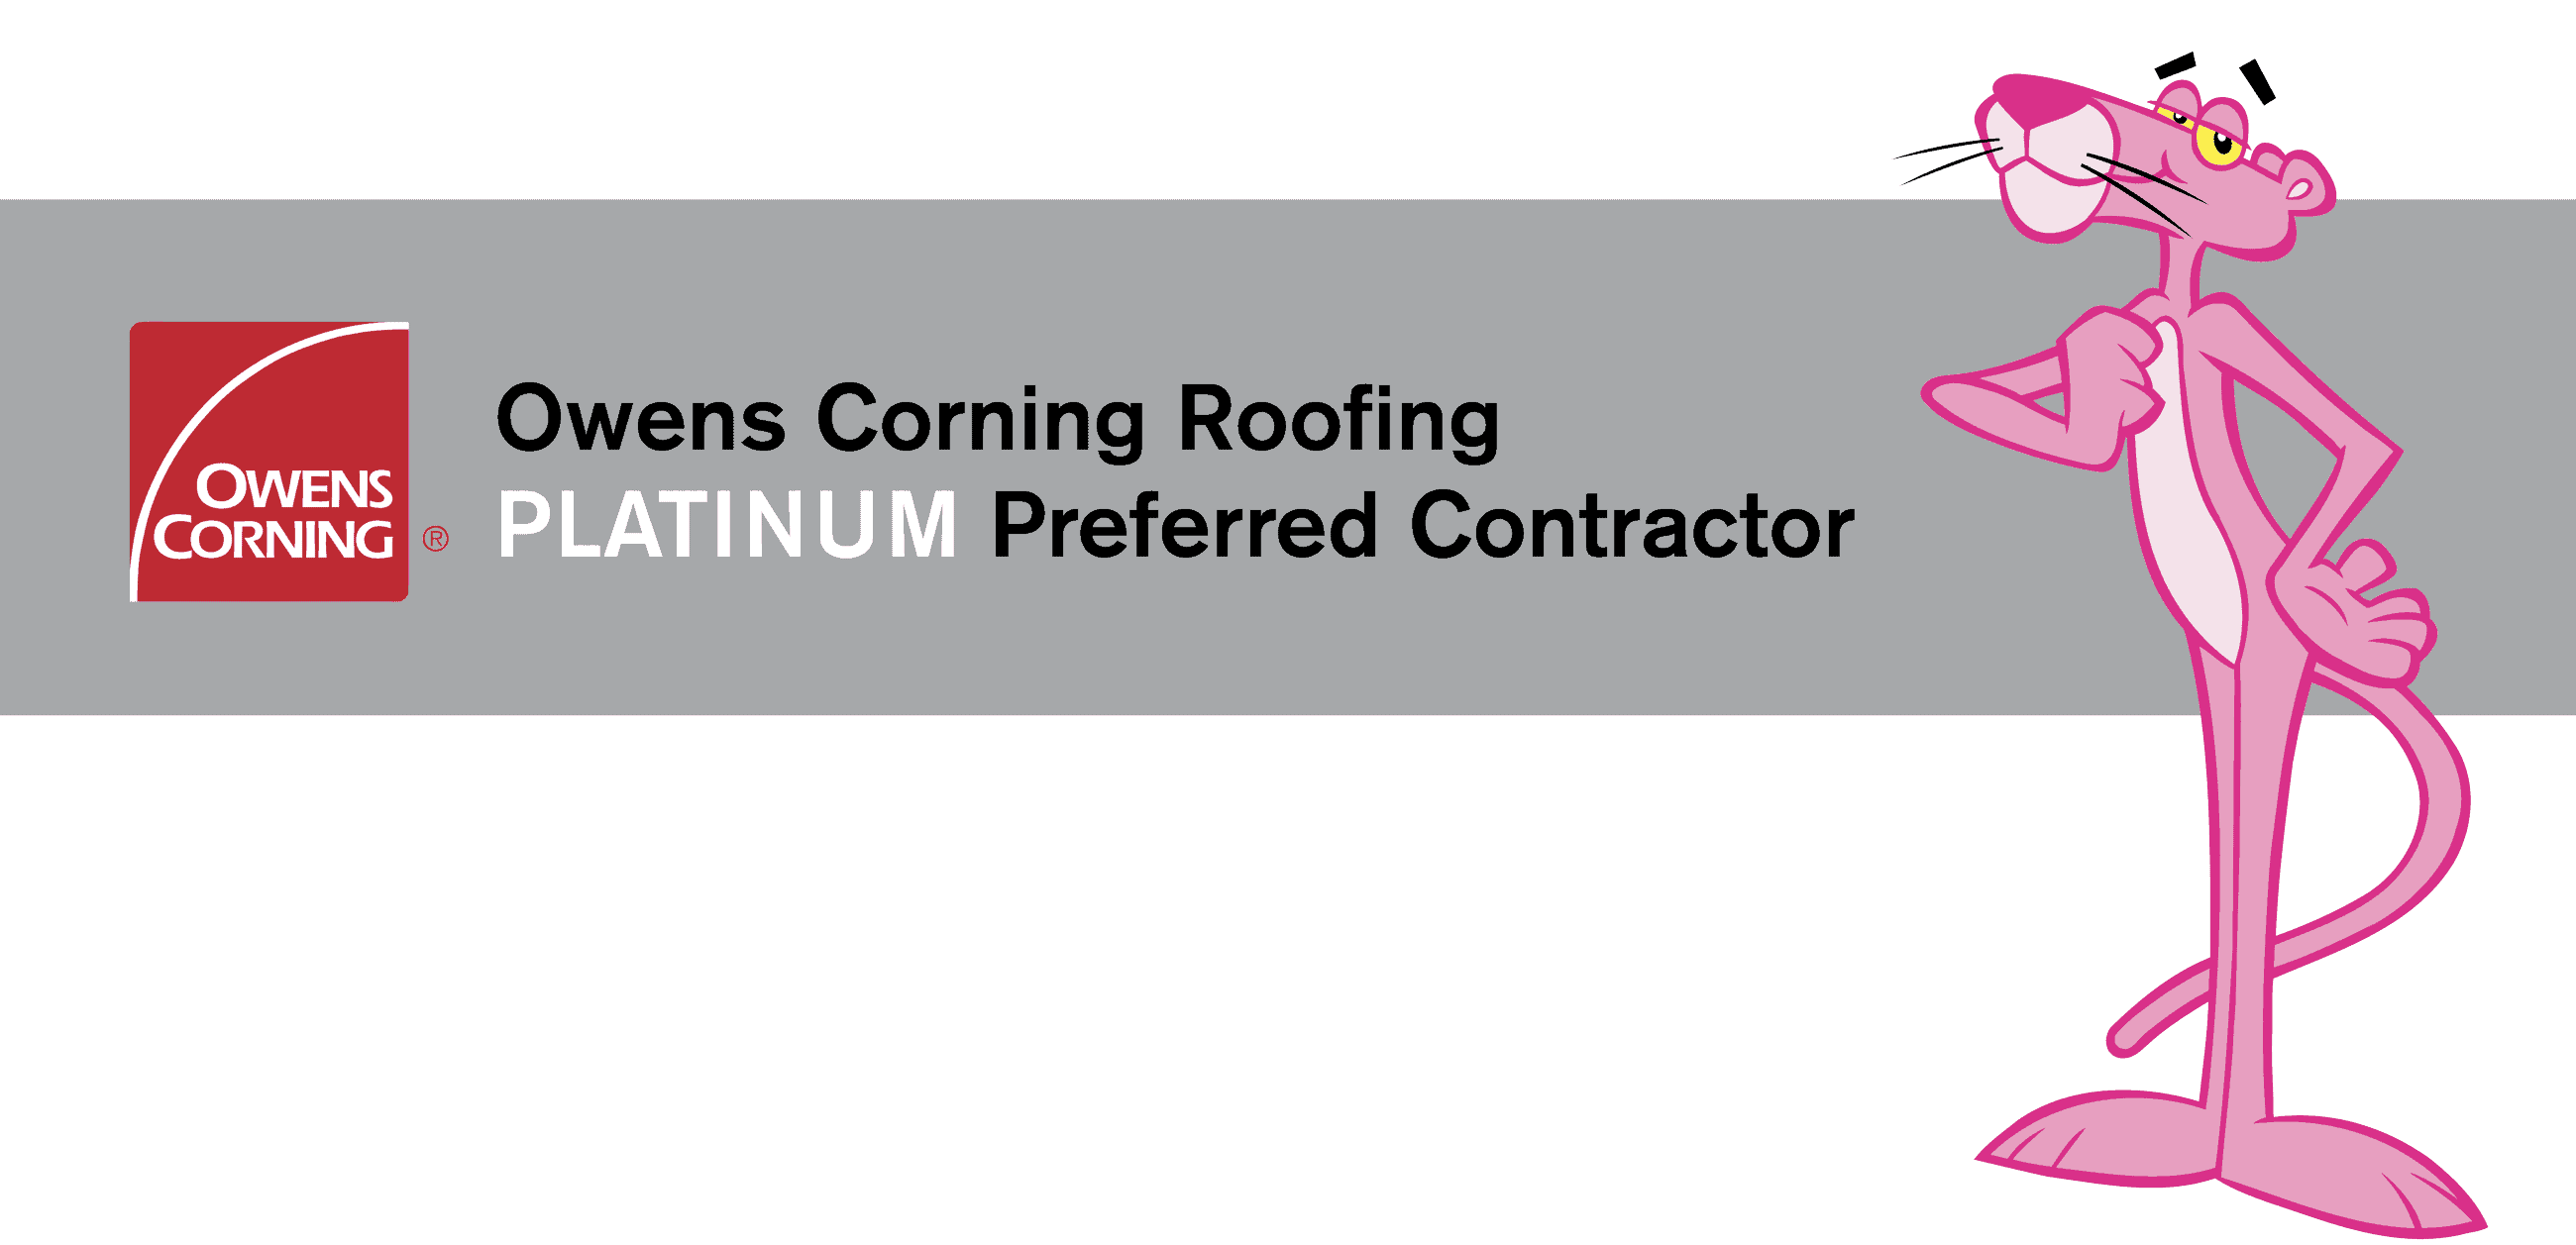 Owens Corning Platinum Preferred Contractor | AmeriPro Roofing